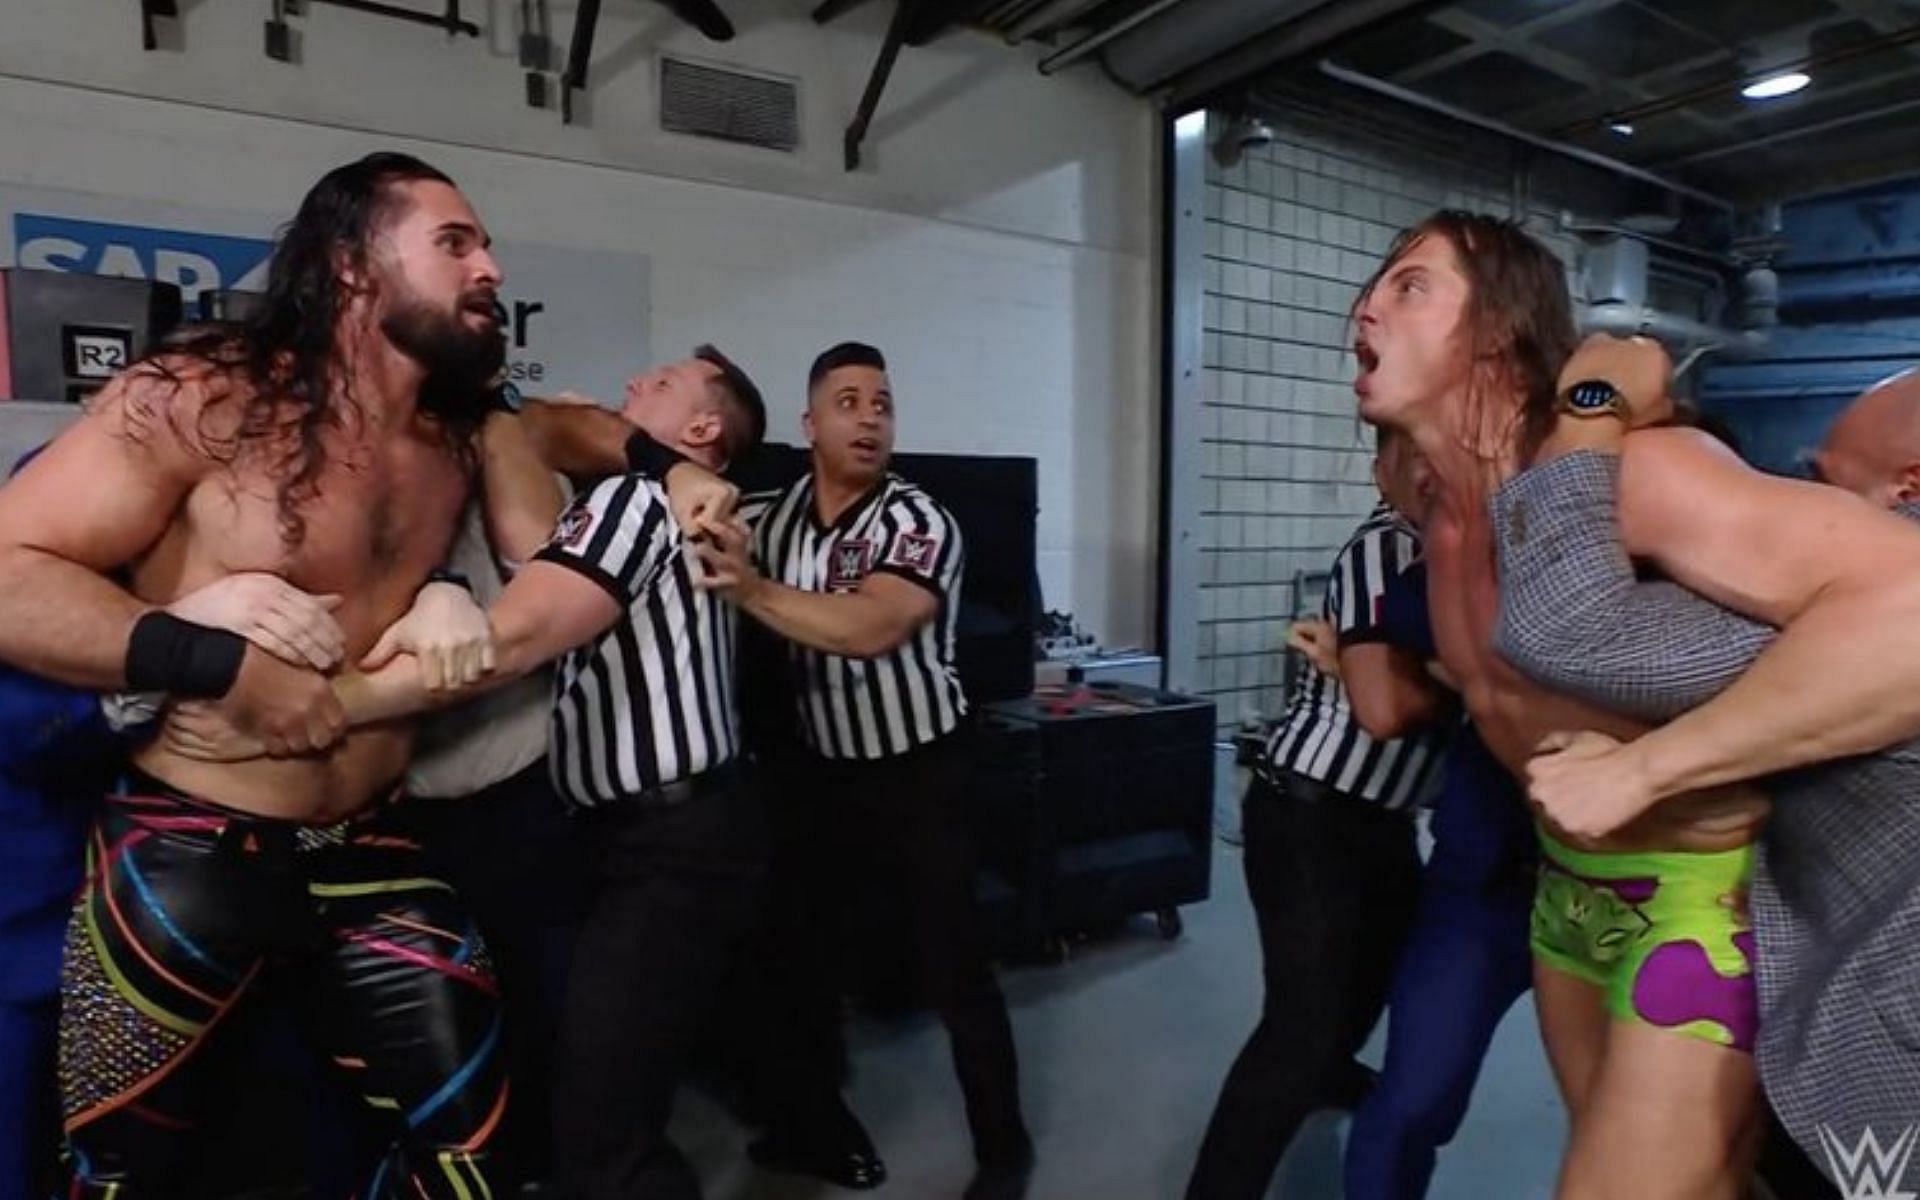 Could Rollins survive in a Fight Pit match with Riddle?